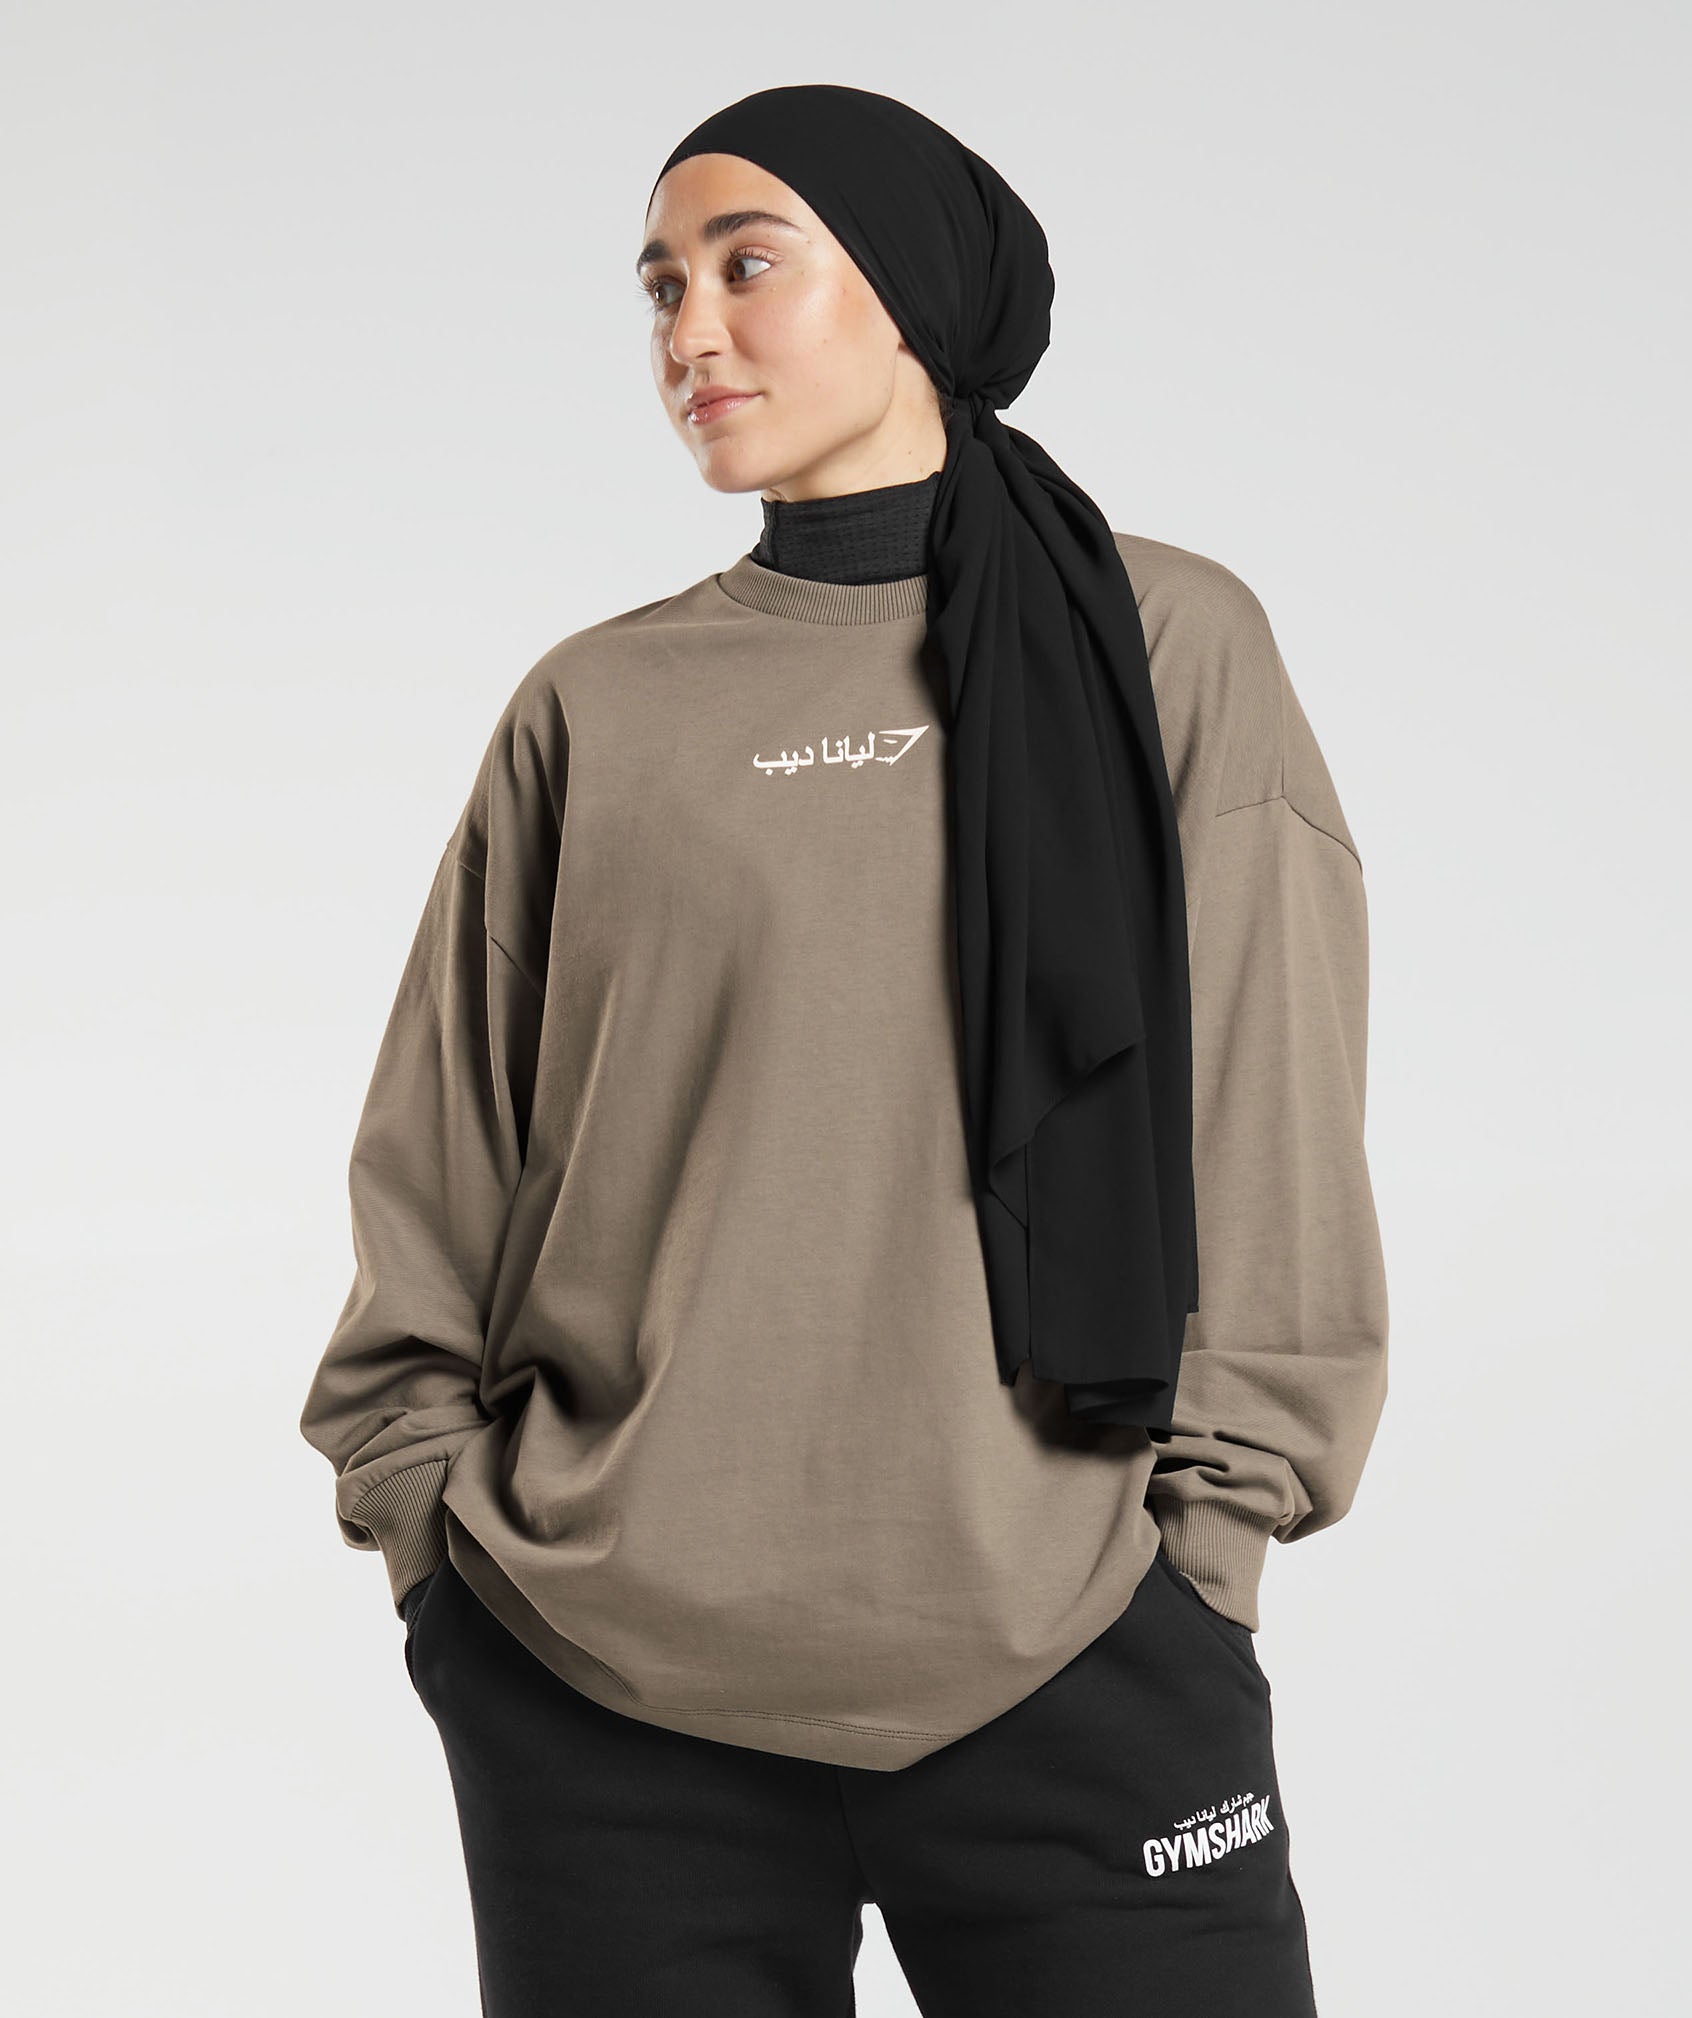 GS X Leana Deeb Oversized Long Sleeve Top in Brushed Brown - view 1